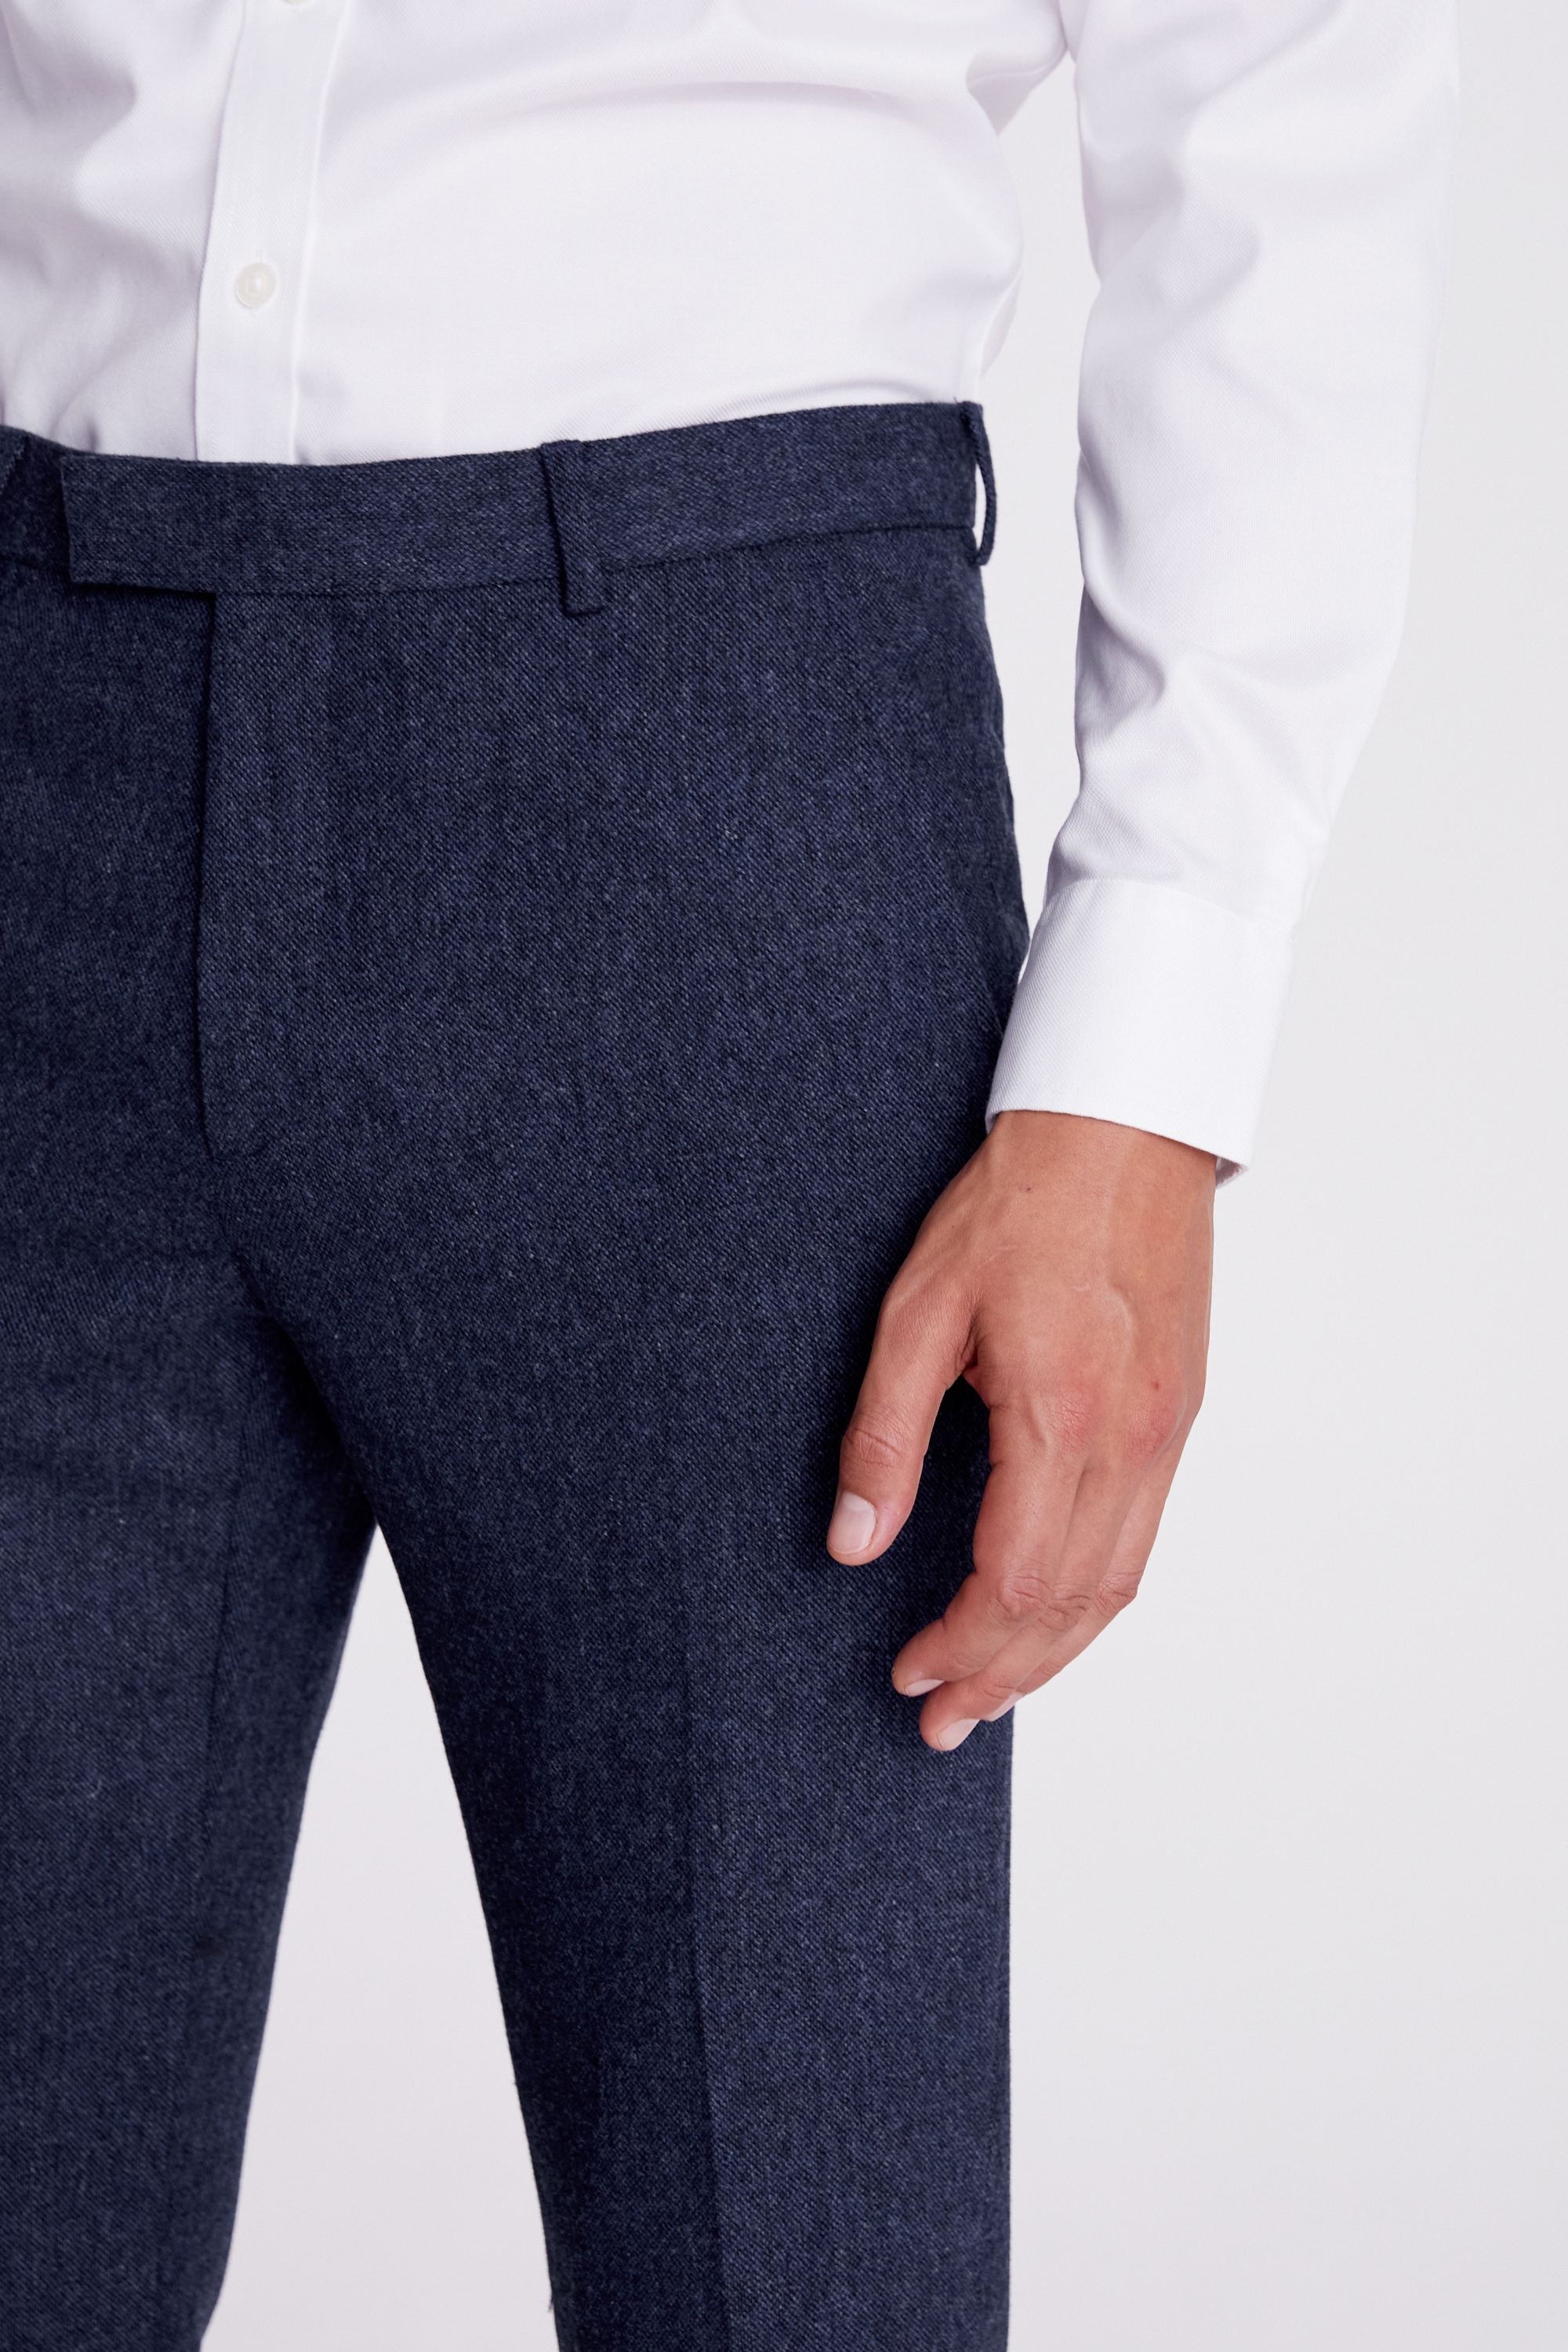 Slim Fit Blue Donegal Trousers | Buy Online at Moss